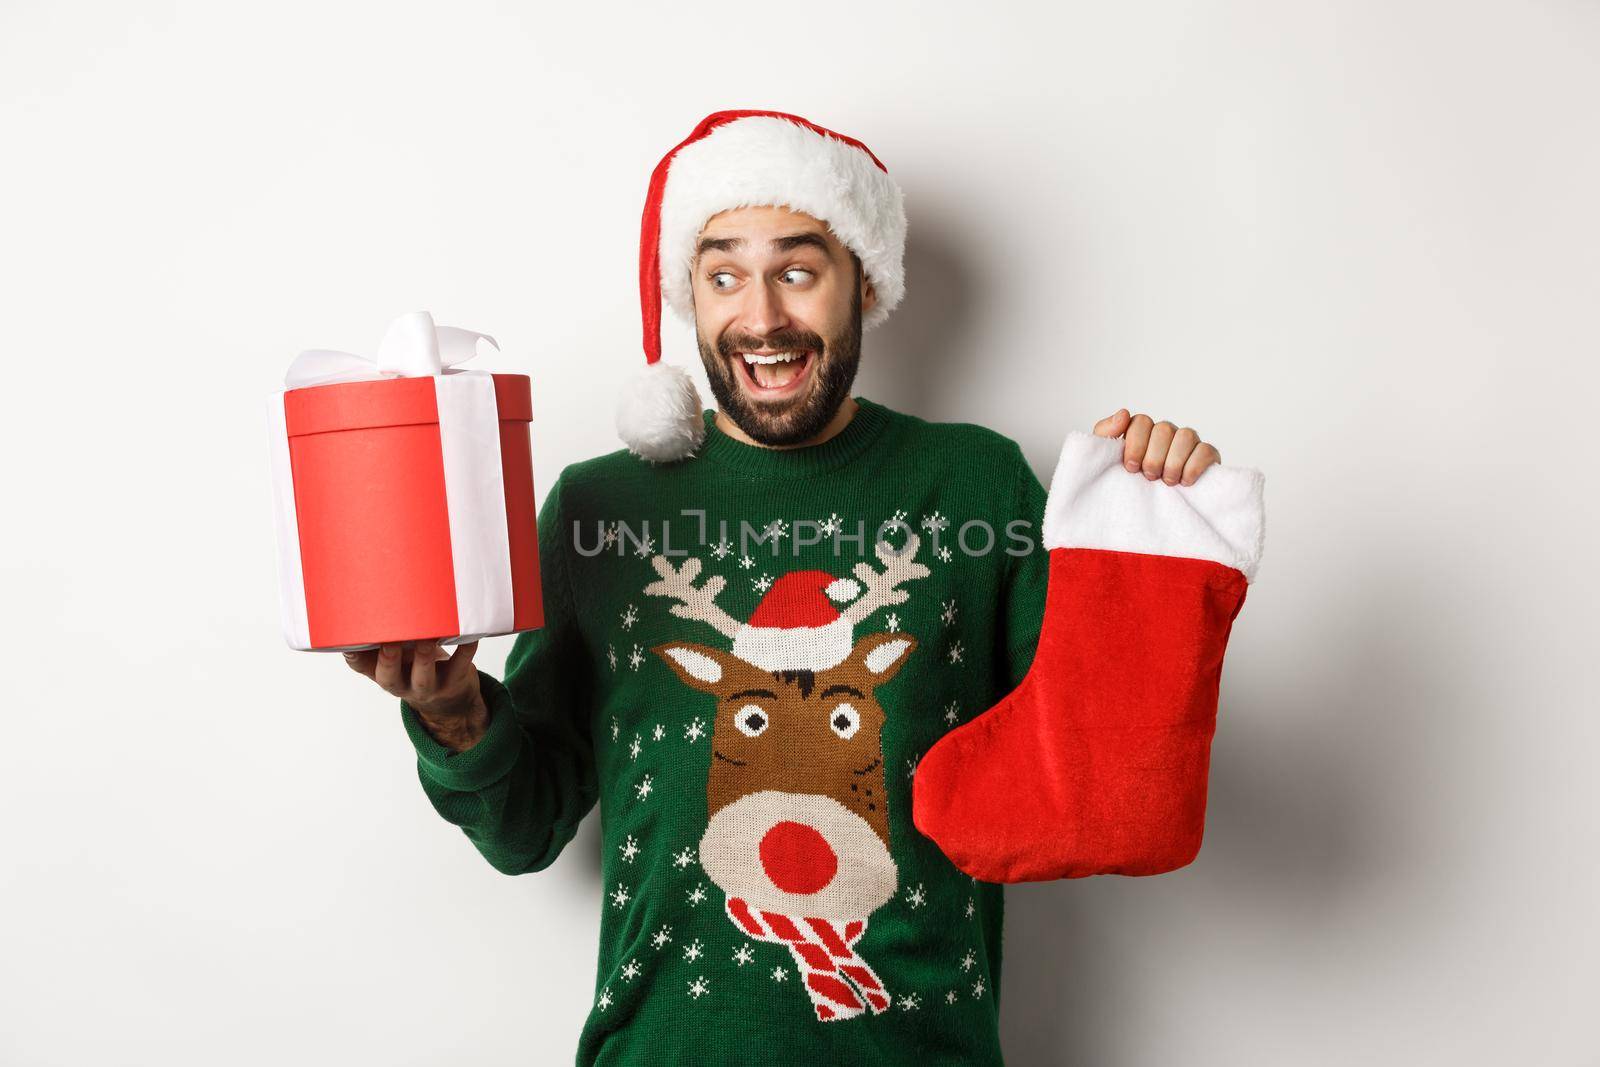 Xmas and winter holidays concept. Happy man got gifts on New Year eve, holding Christmas sock and present inside a box, standing over white background.